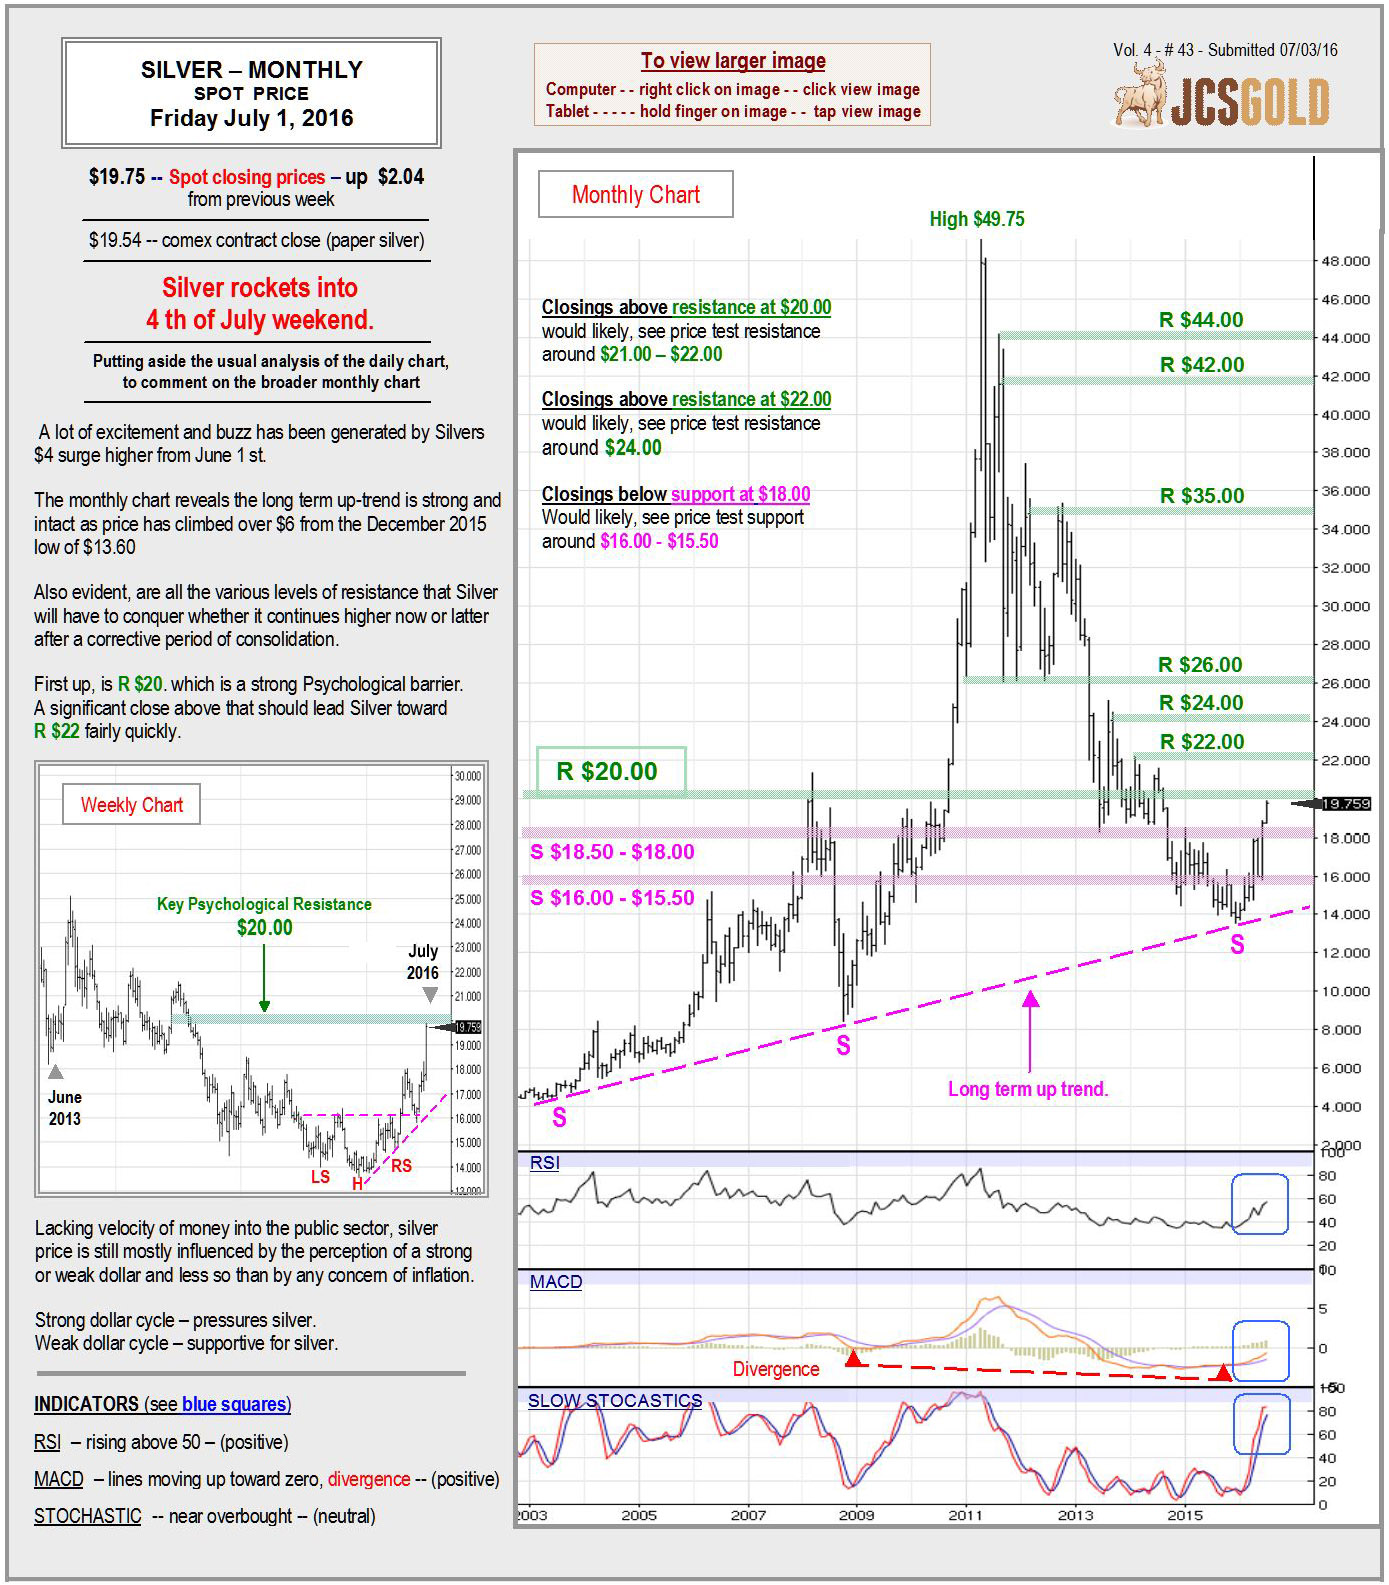 July 1, 2016 chart 2 & commentary